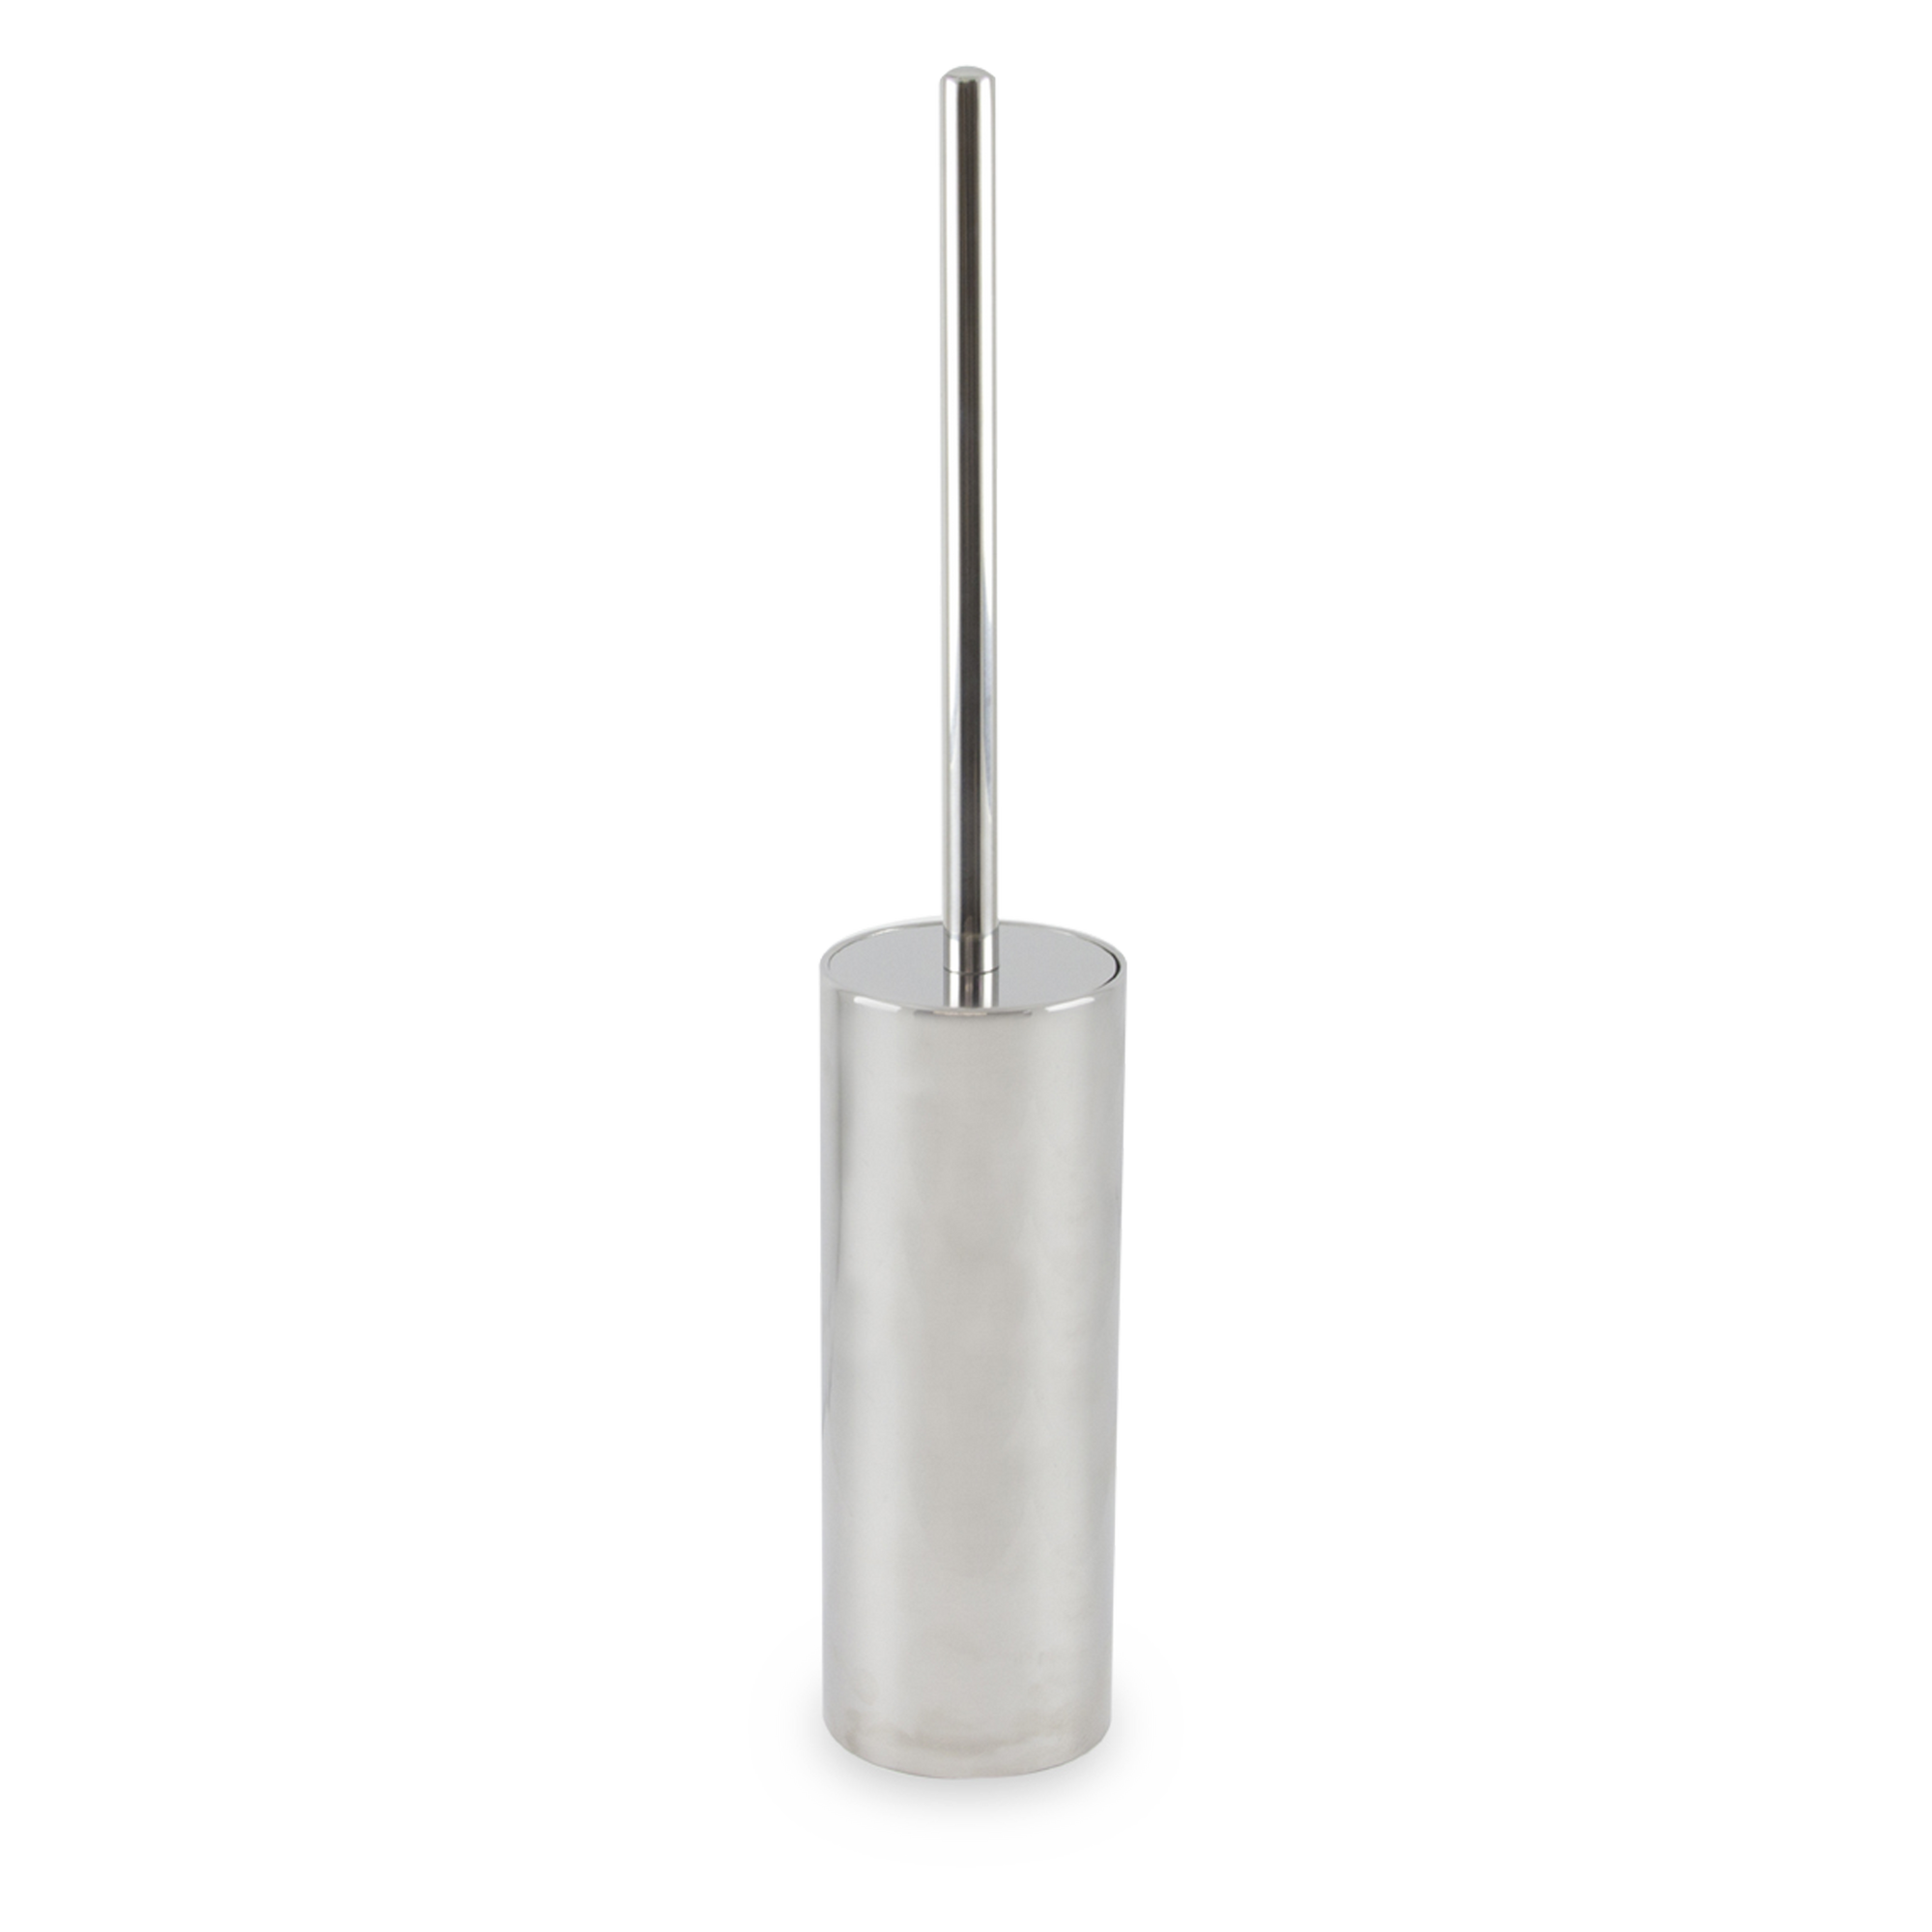 The Annex Toilet Brush features a polished chrome construction, a durable brush and a sleek design.